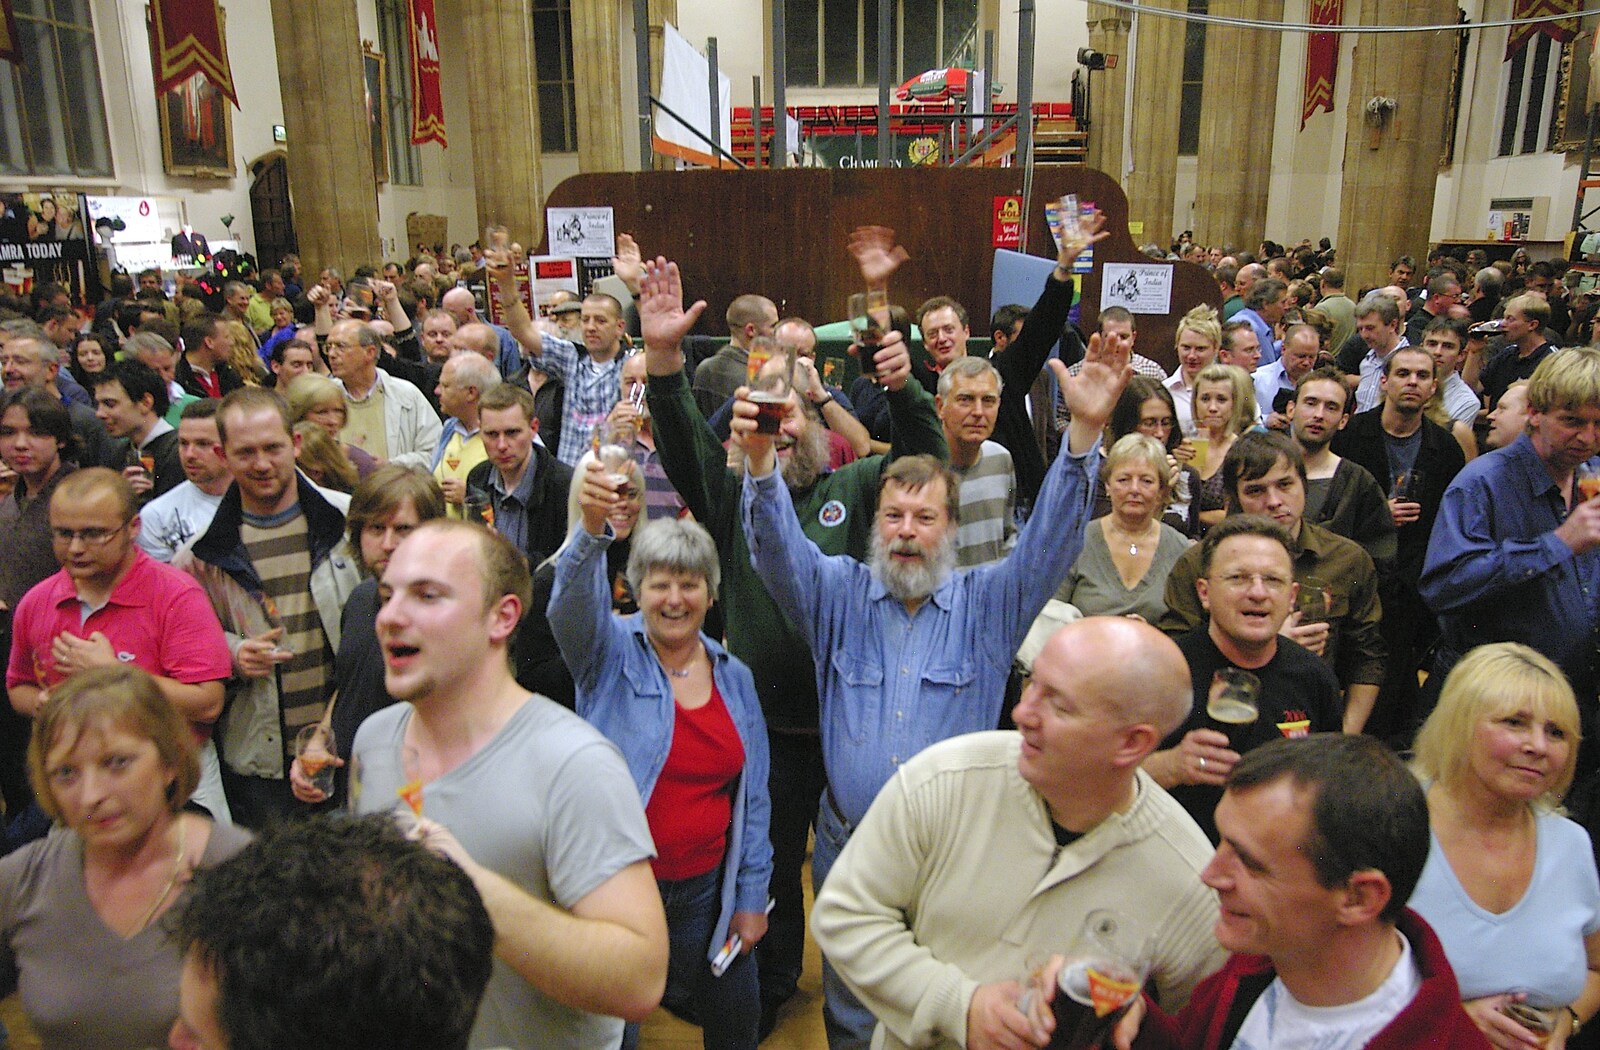 Benny and Gloria raise their pints from The CAMRA Norwich Beer Festival, St. Andrew's Hall, Norwich - 25th October 2006